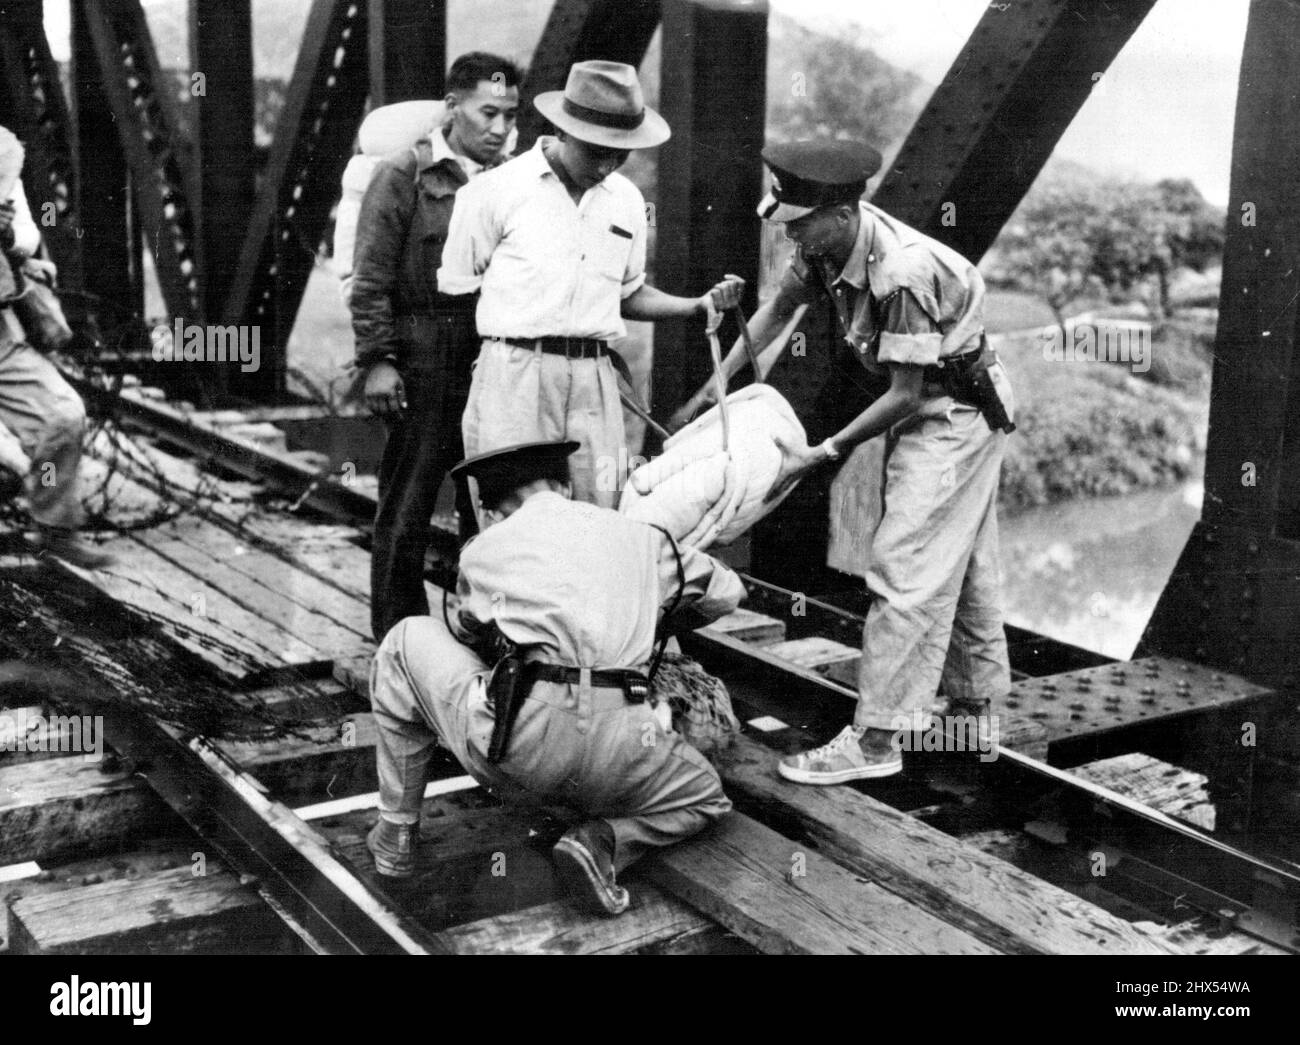 Border Precaustions - In *****. Two constables if the Hong Kong police examine parcels of personal goods belonging to Chinese on their way across the border into the British territory. At the railroad bridge of Lou, which marks the frontier between Chinese and British territories, Chinese making their way into the British zone have their bundles searched for small arms by two Chinese constables of the Hong Kong Police, in this picture just received from Hong Kong. October 27, 1949. (Photo by Reuterphoto). Stock Photo